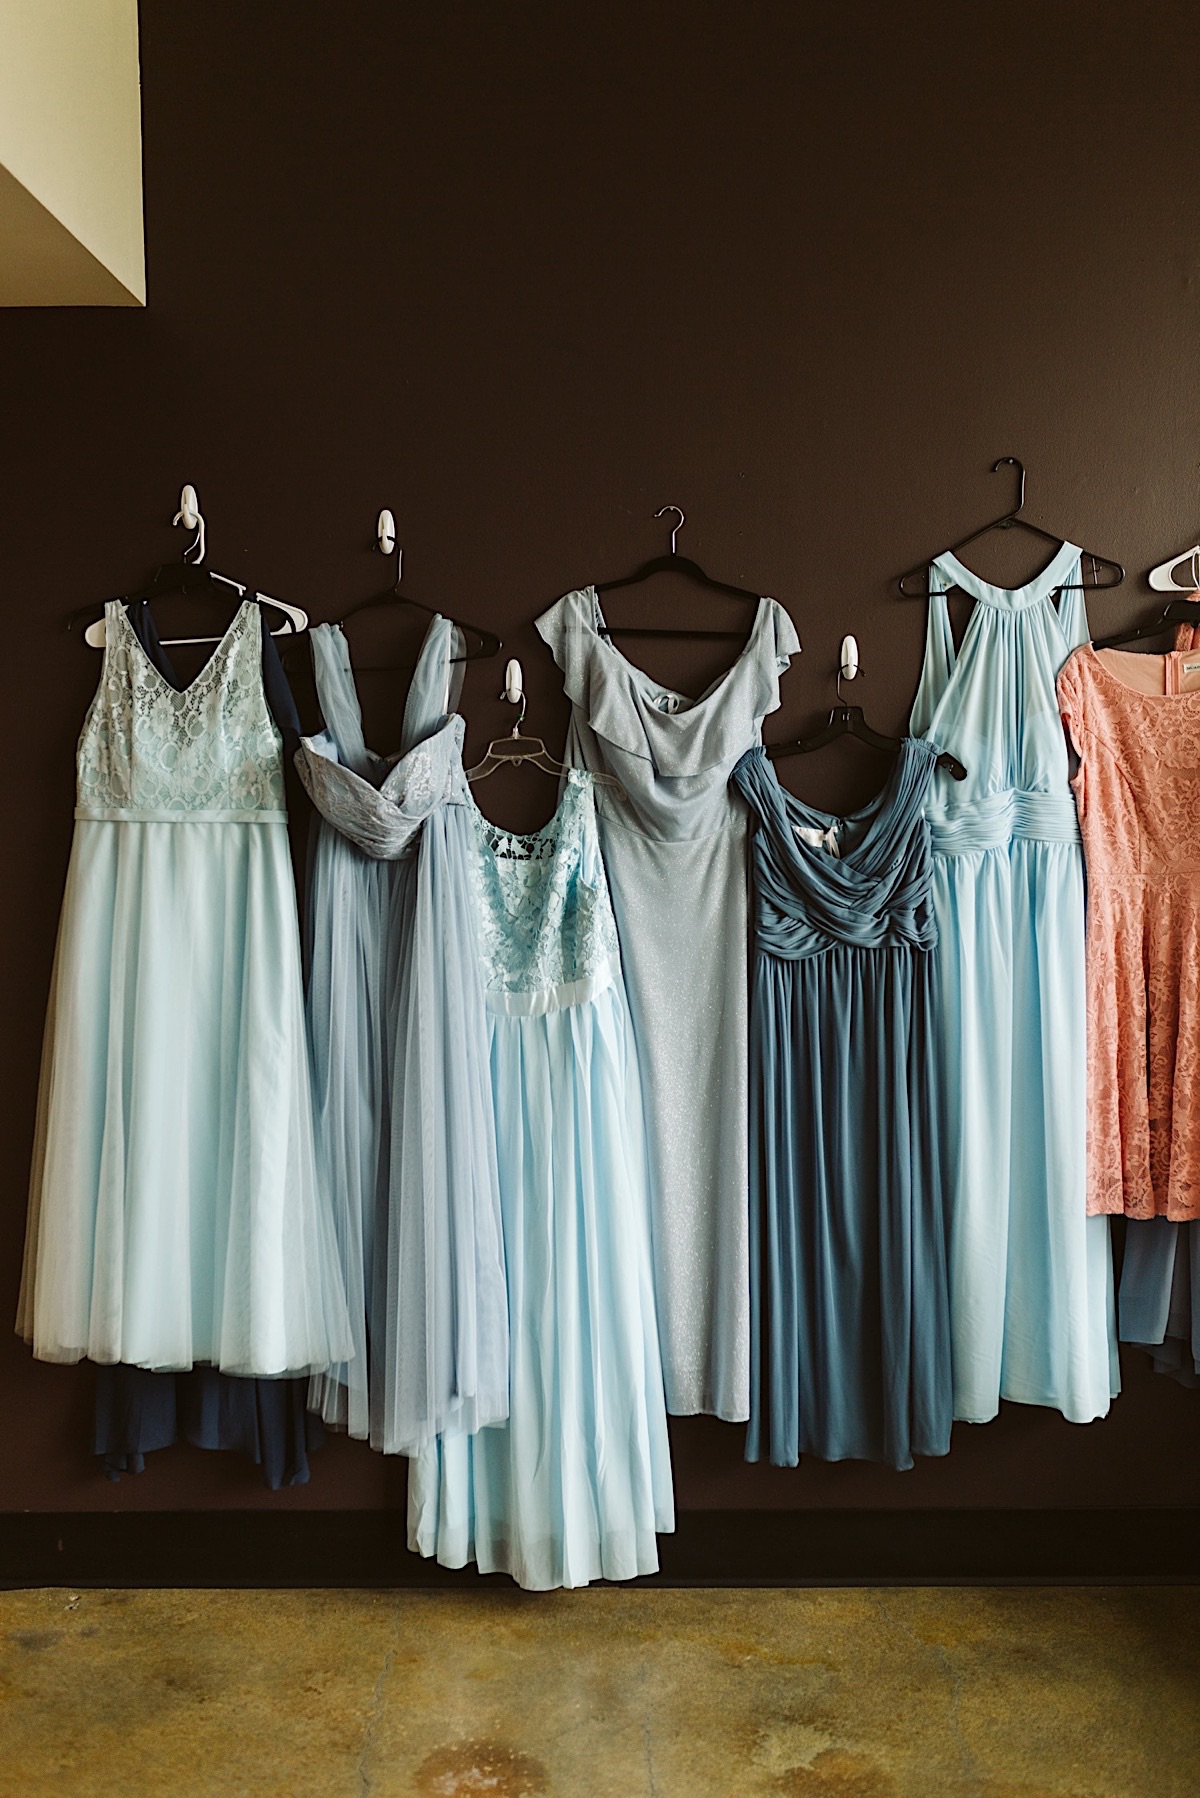 Bridesmaids dresses in various blue tones hang on hooks on a deep brown wall